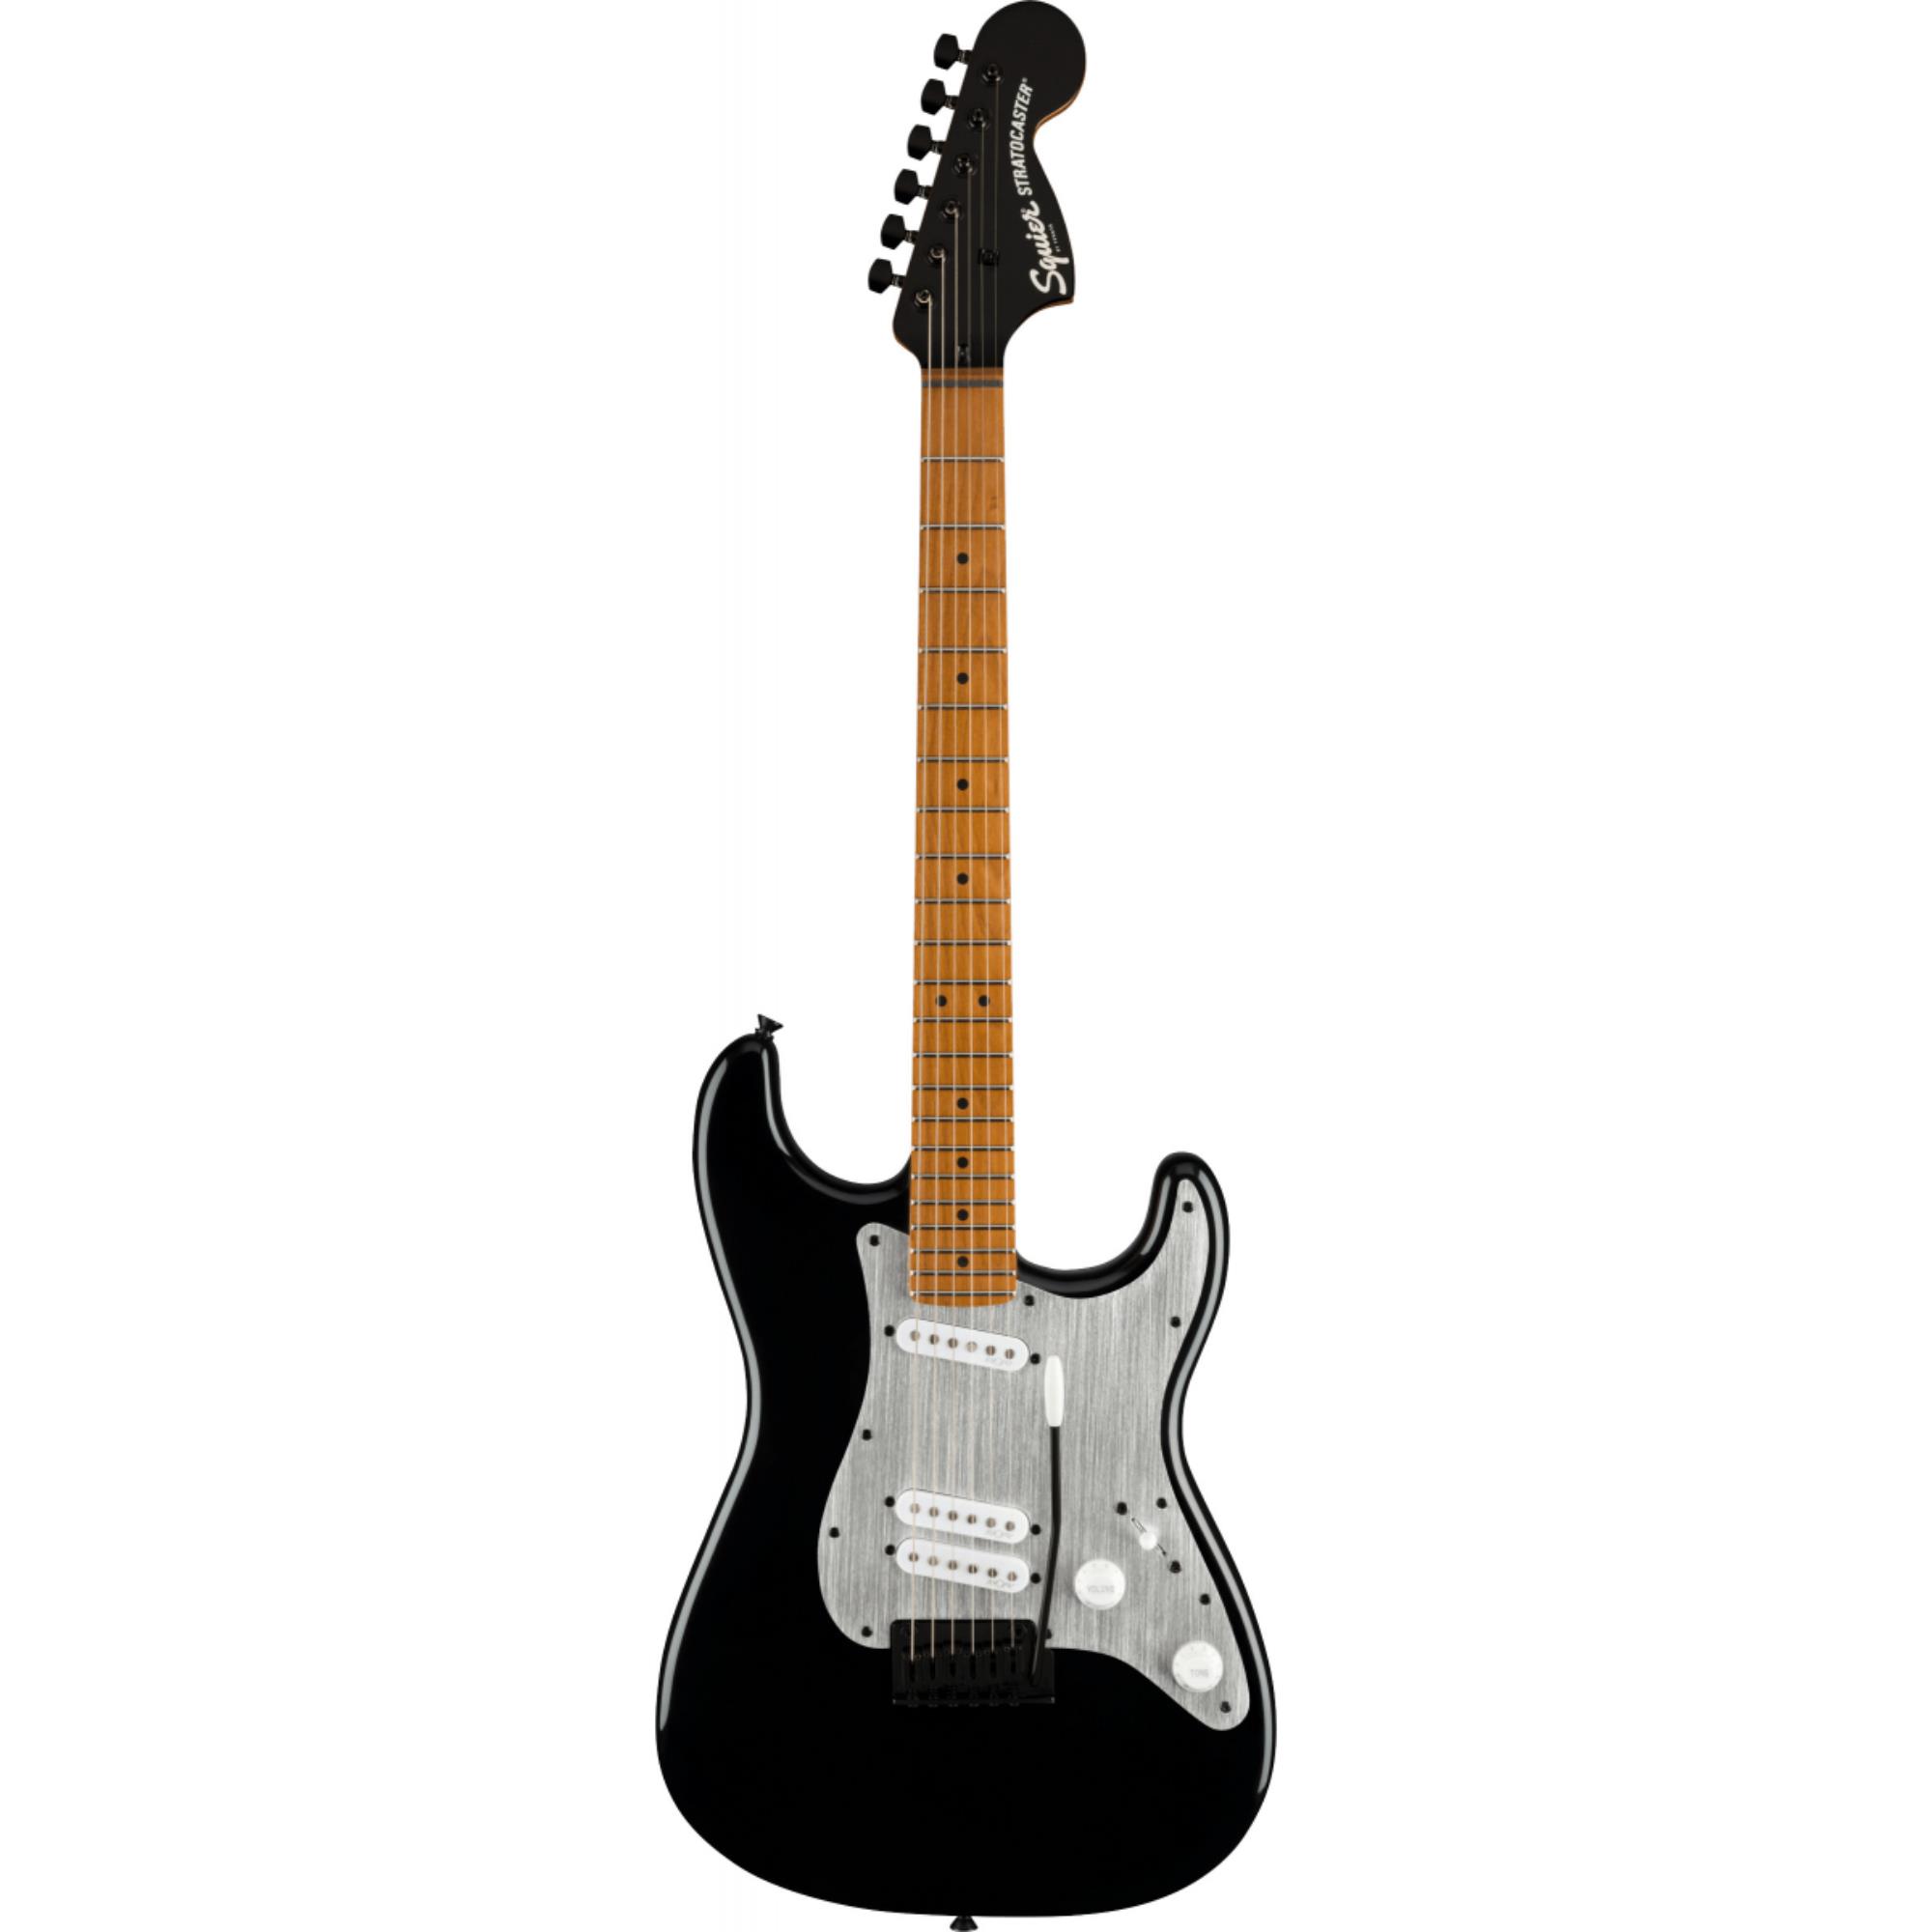 SQUIER Contemporary Stratocaster Special - Roasted Maple Fingerboard - Black   0370230506